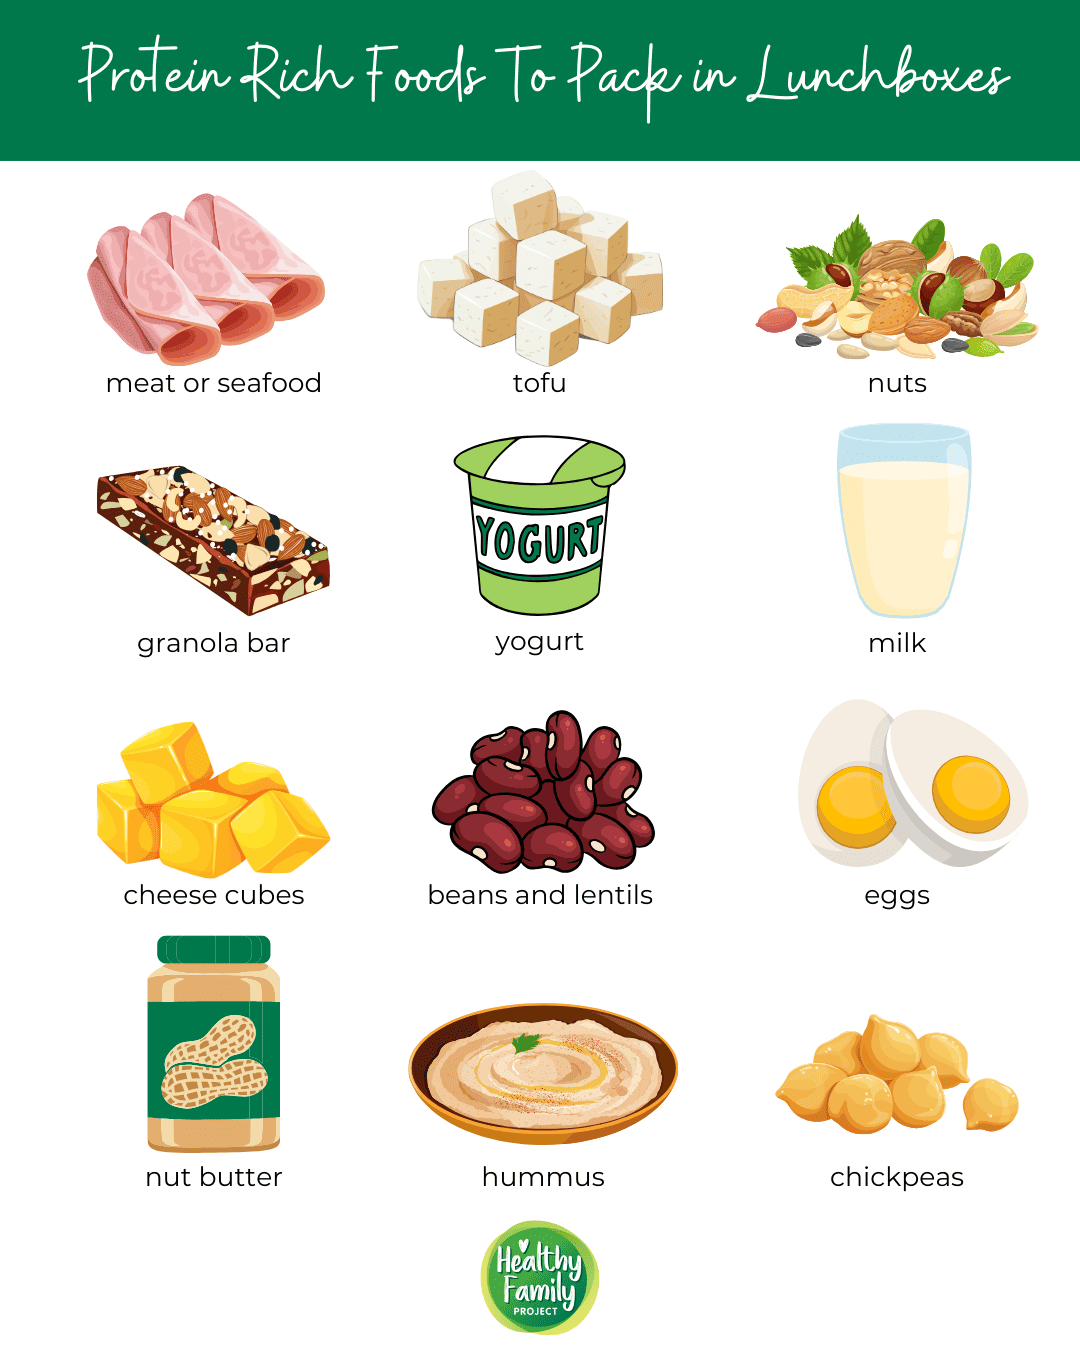 Protein Rich Foods To Pack in Lunchboxes Infographic